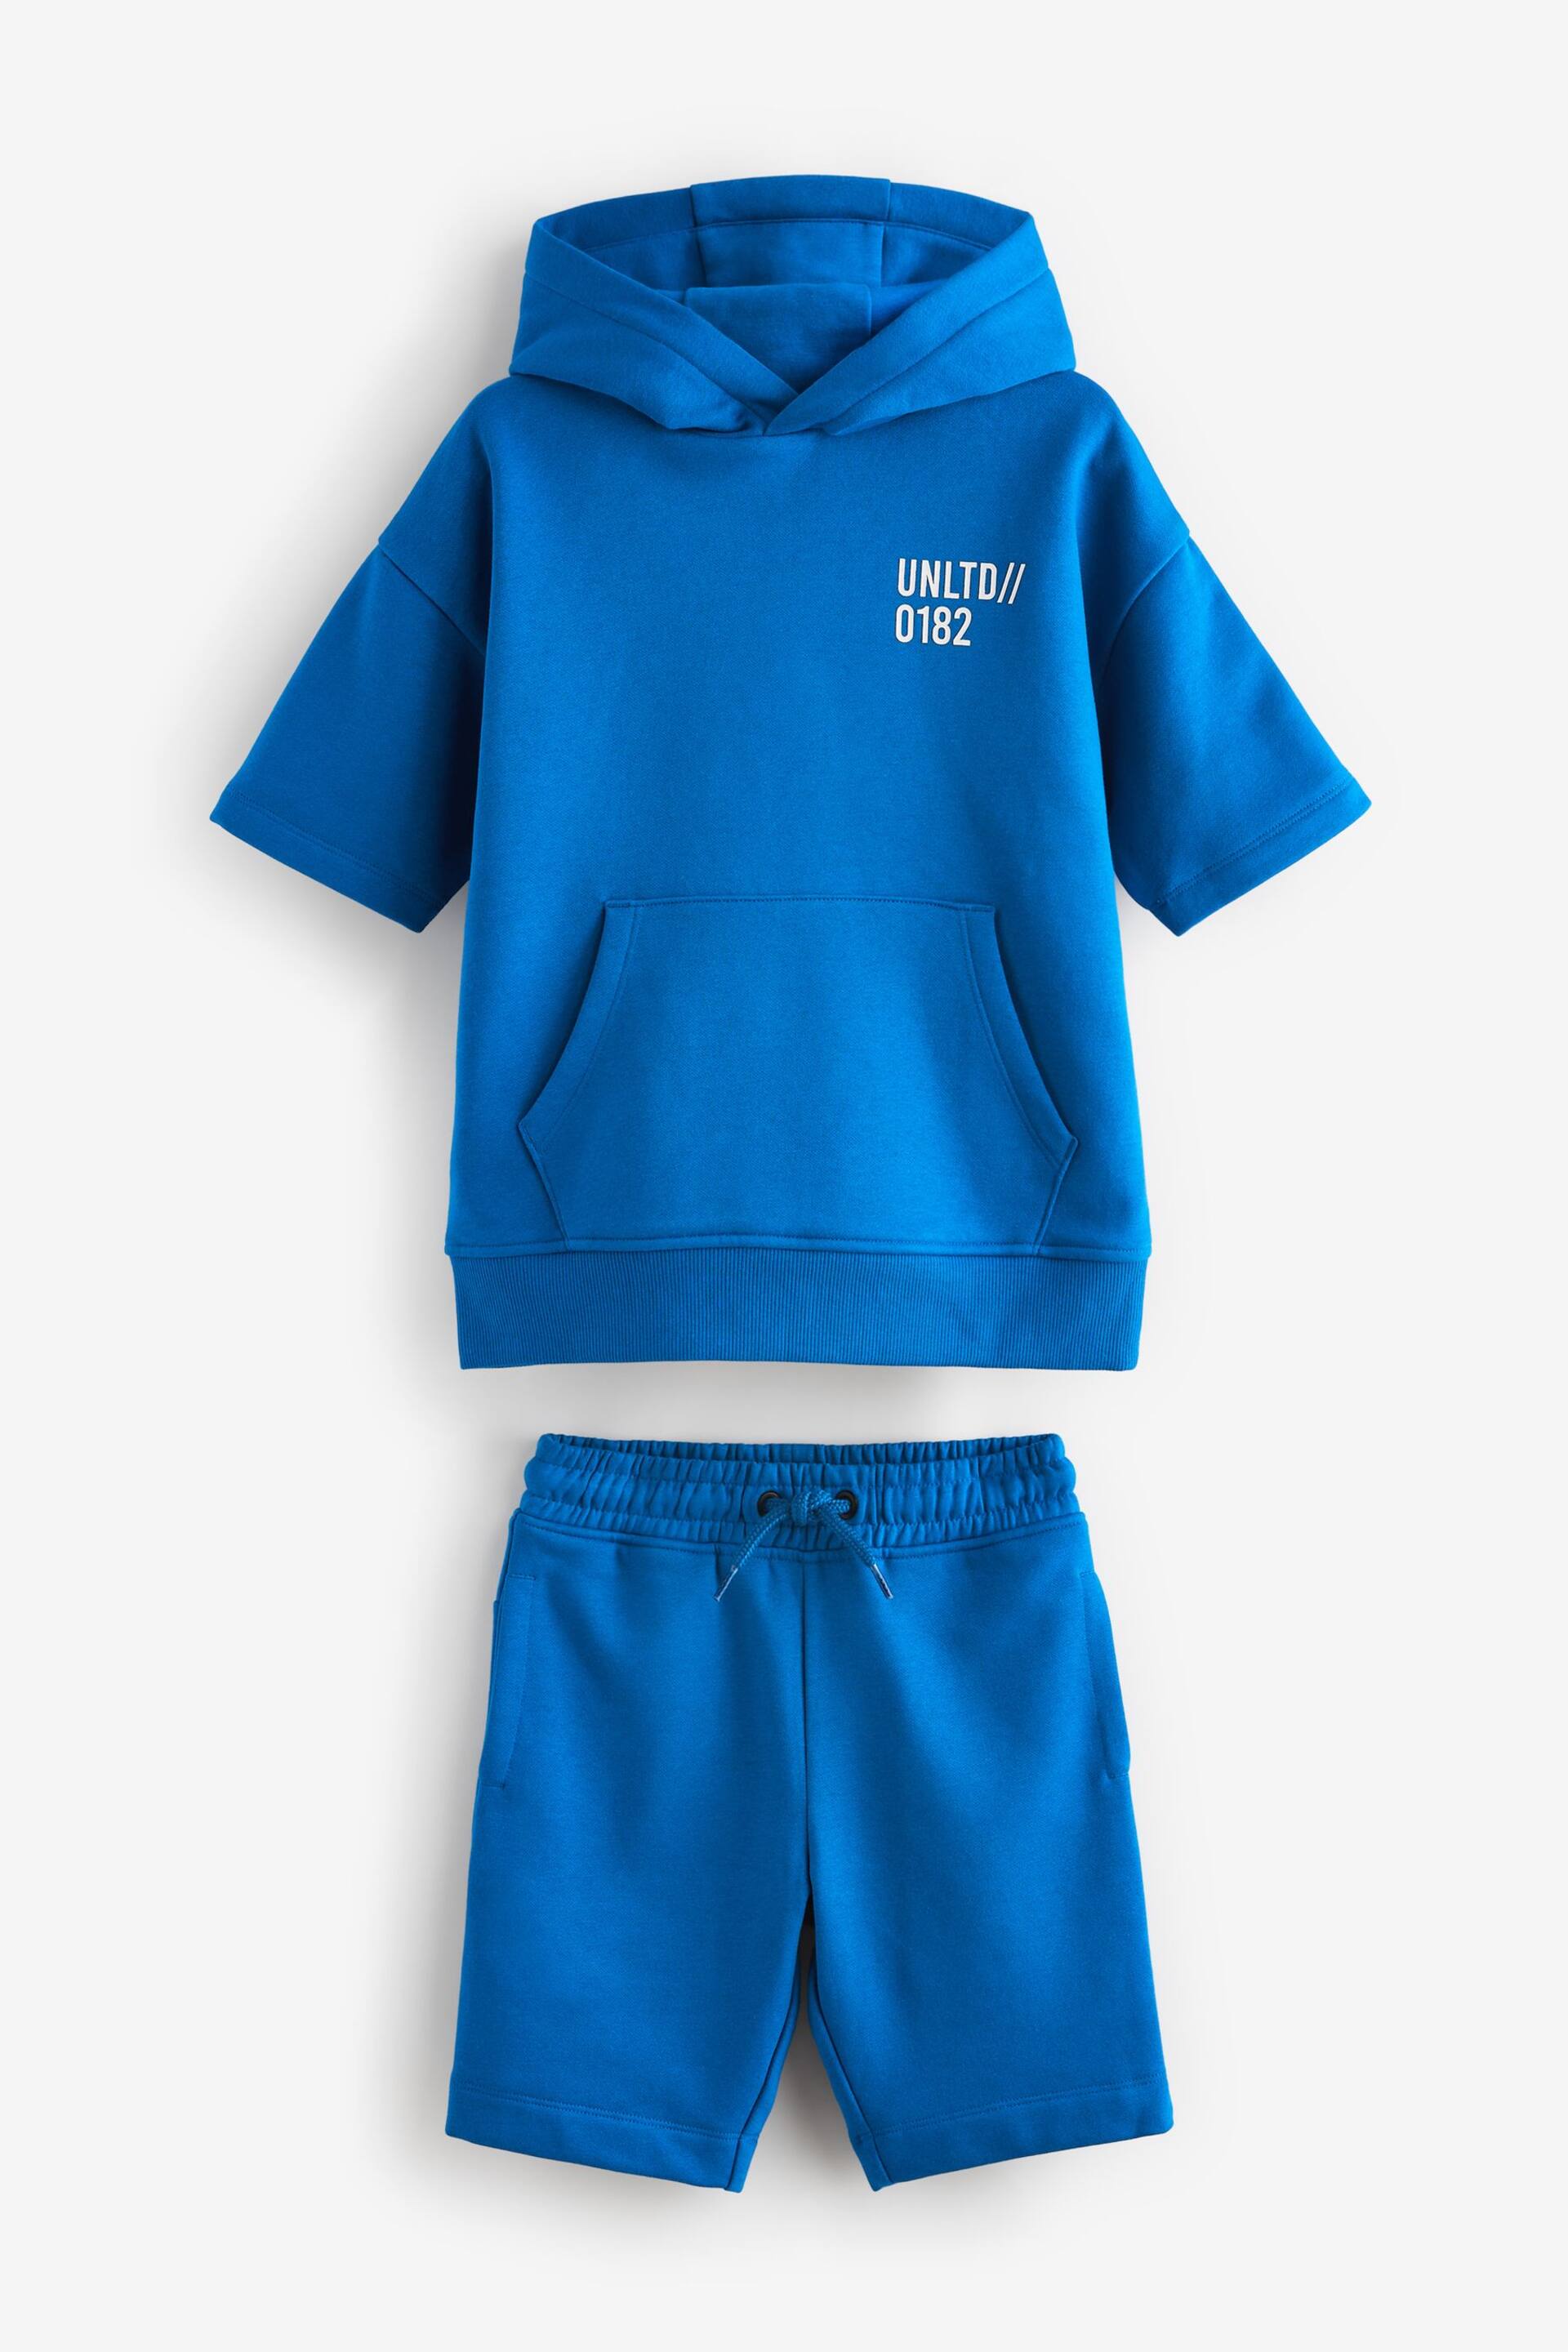 Cobalt Blue Short Sleeve Hoodie and Shorts Set (3-16yrs) - Image 4 of 6